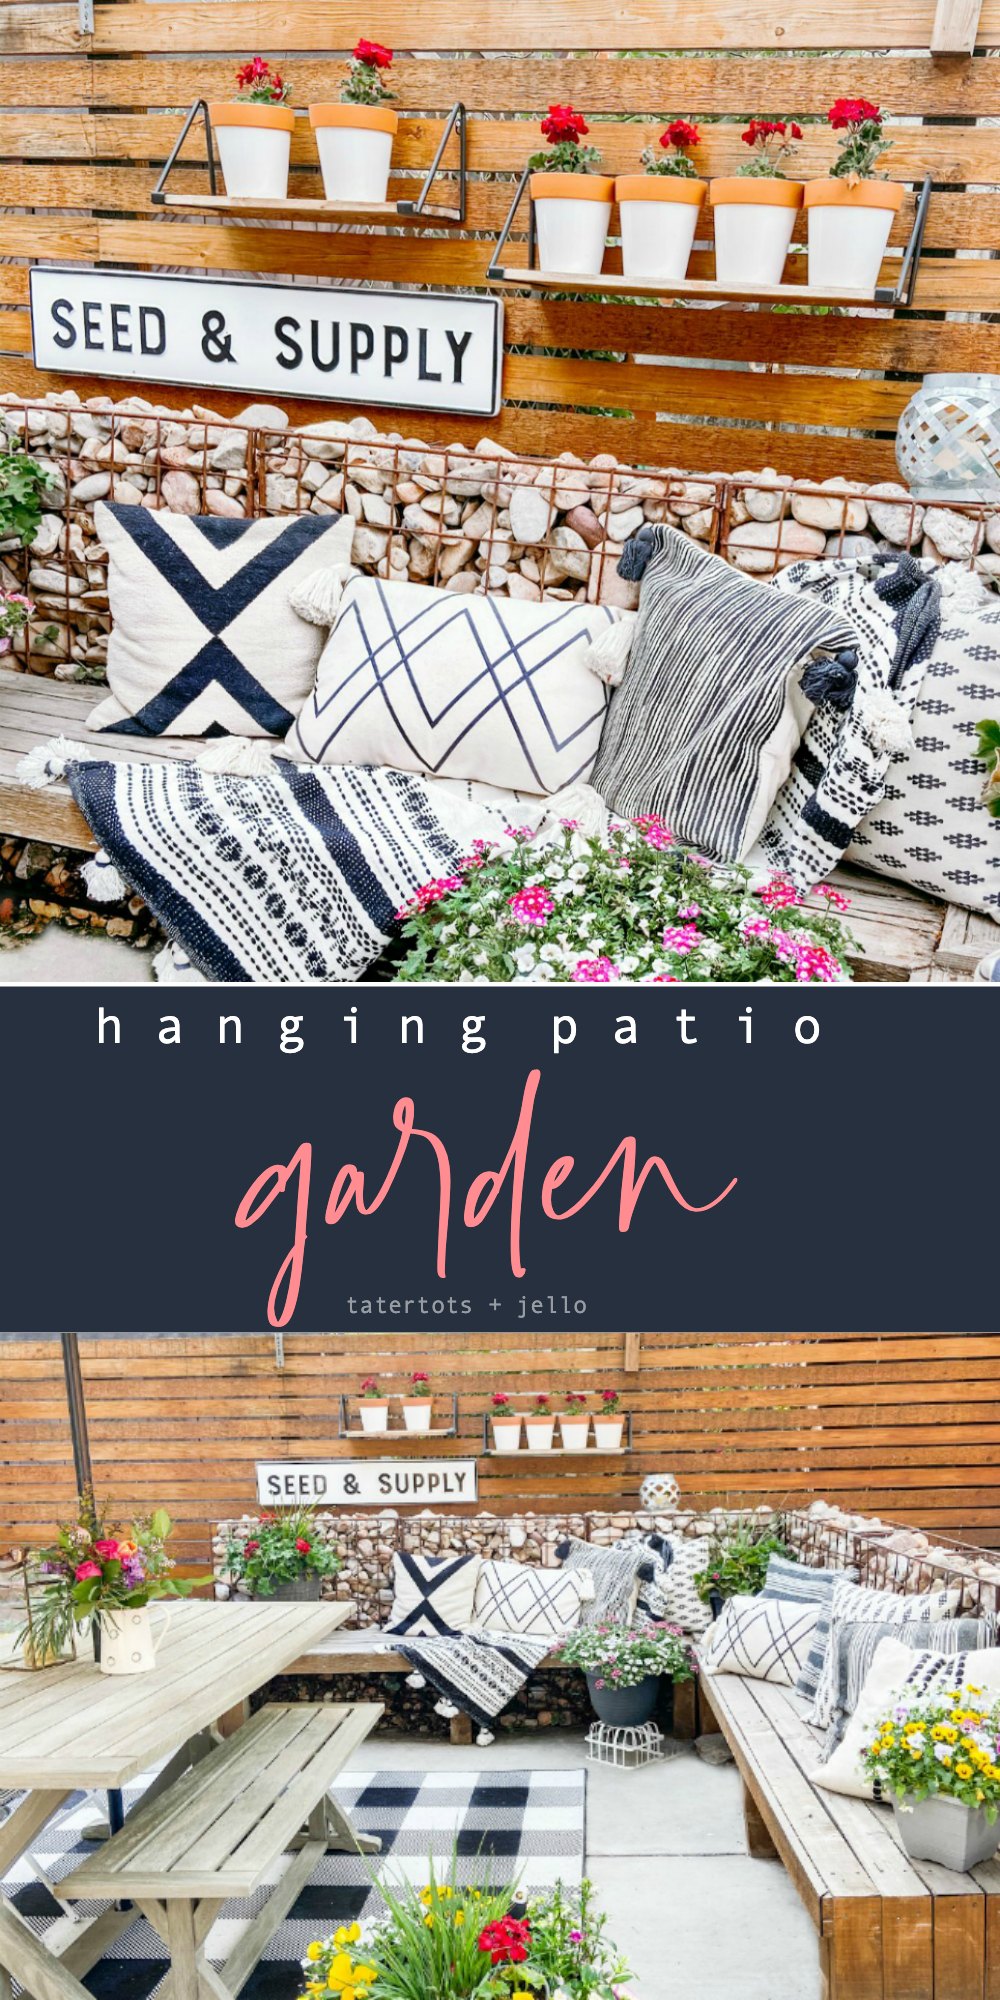 DIY Hanging Patio Garden. Make the most of your patio space by hanging shelves and planting flowers or herbs in painted pots! 